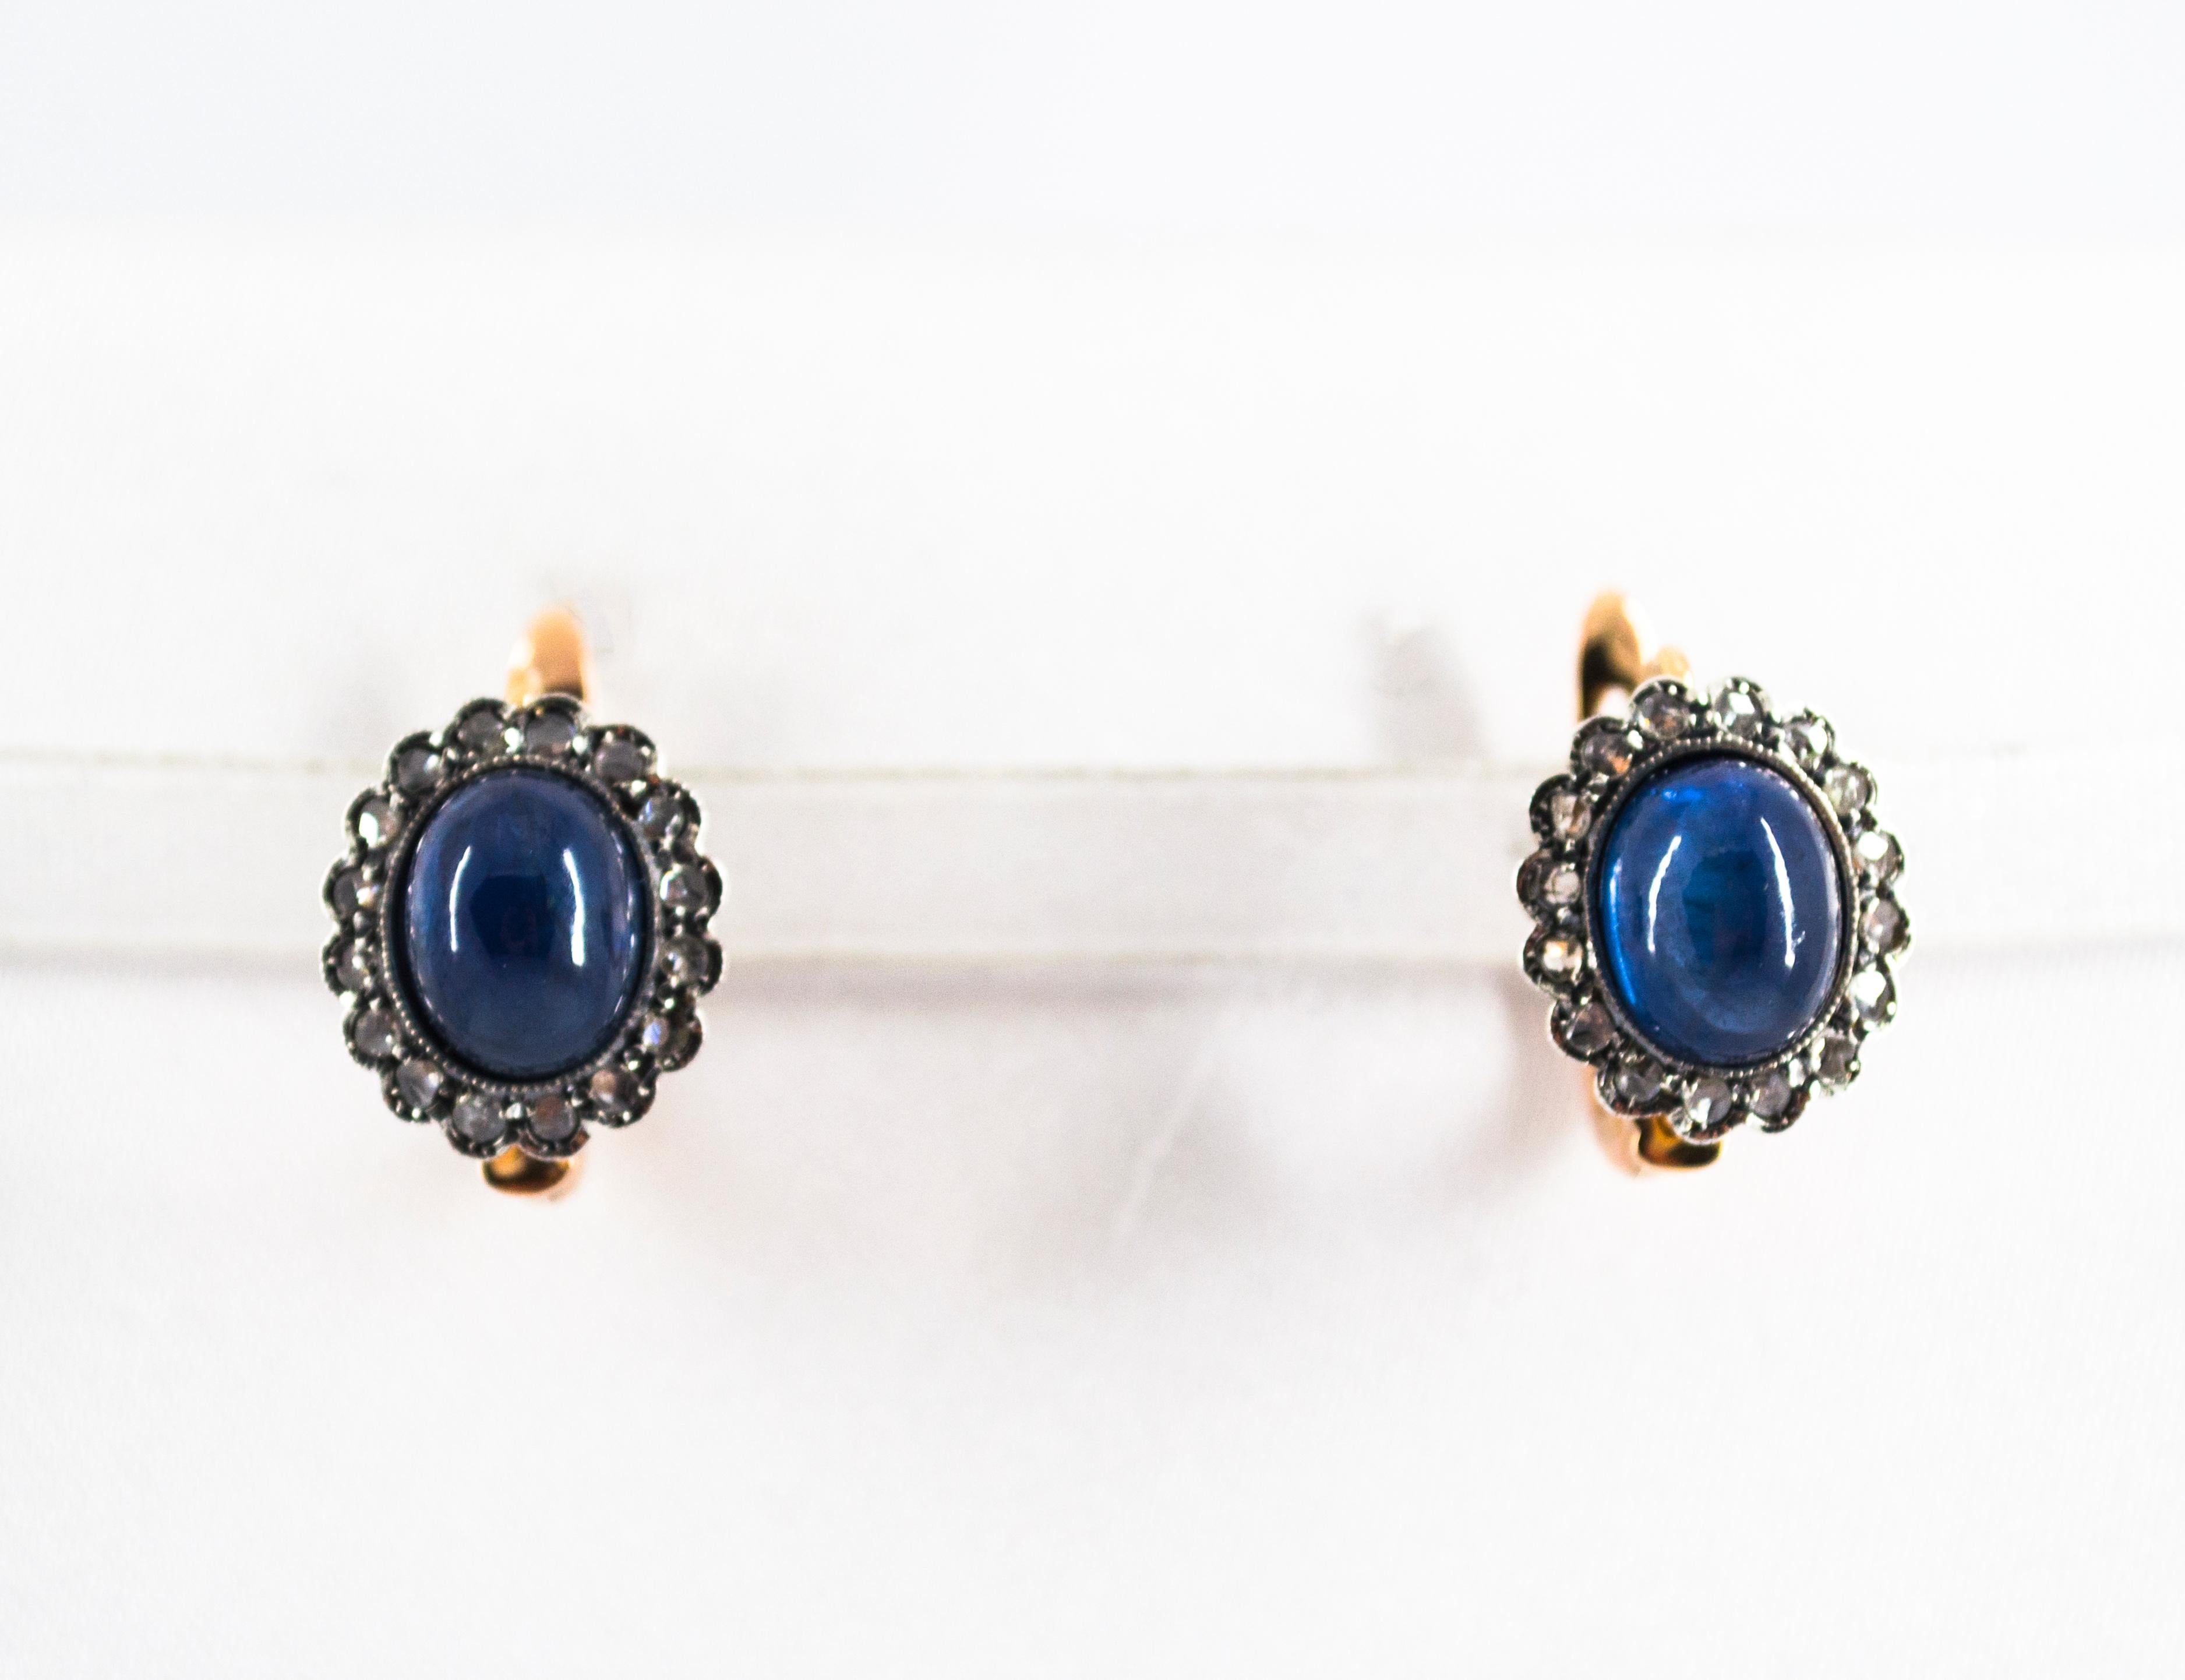 These Earrings are made of 9K Yellow Gold and Sterling Silver.
These Earrings are available also in 14K and 18K Yellow Gold.
These Earrings have 0.30 Carats of White Rose Cut Diamonds.
These Earrings have 7.10 Carats of Blue Sapphires.
All our